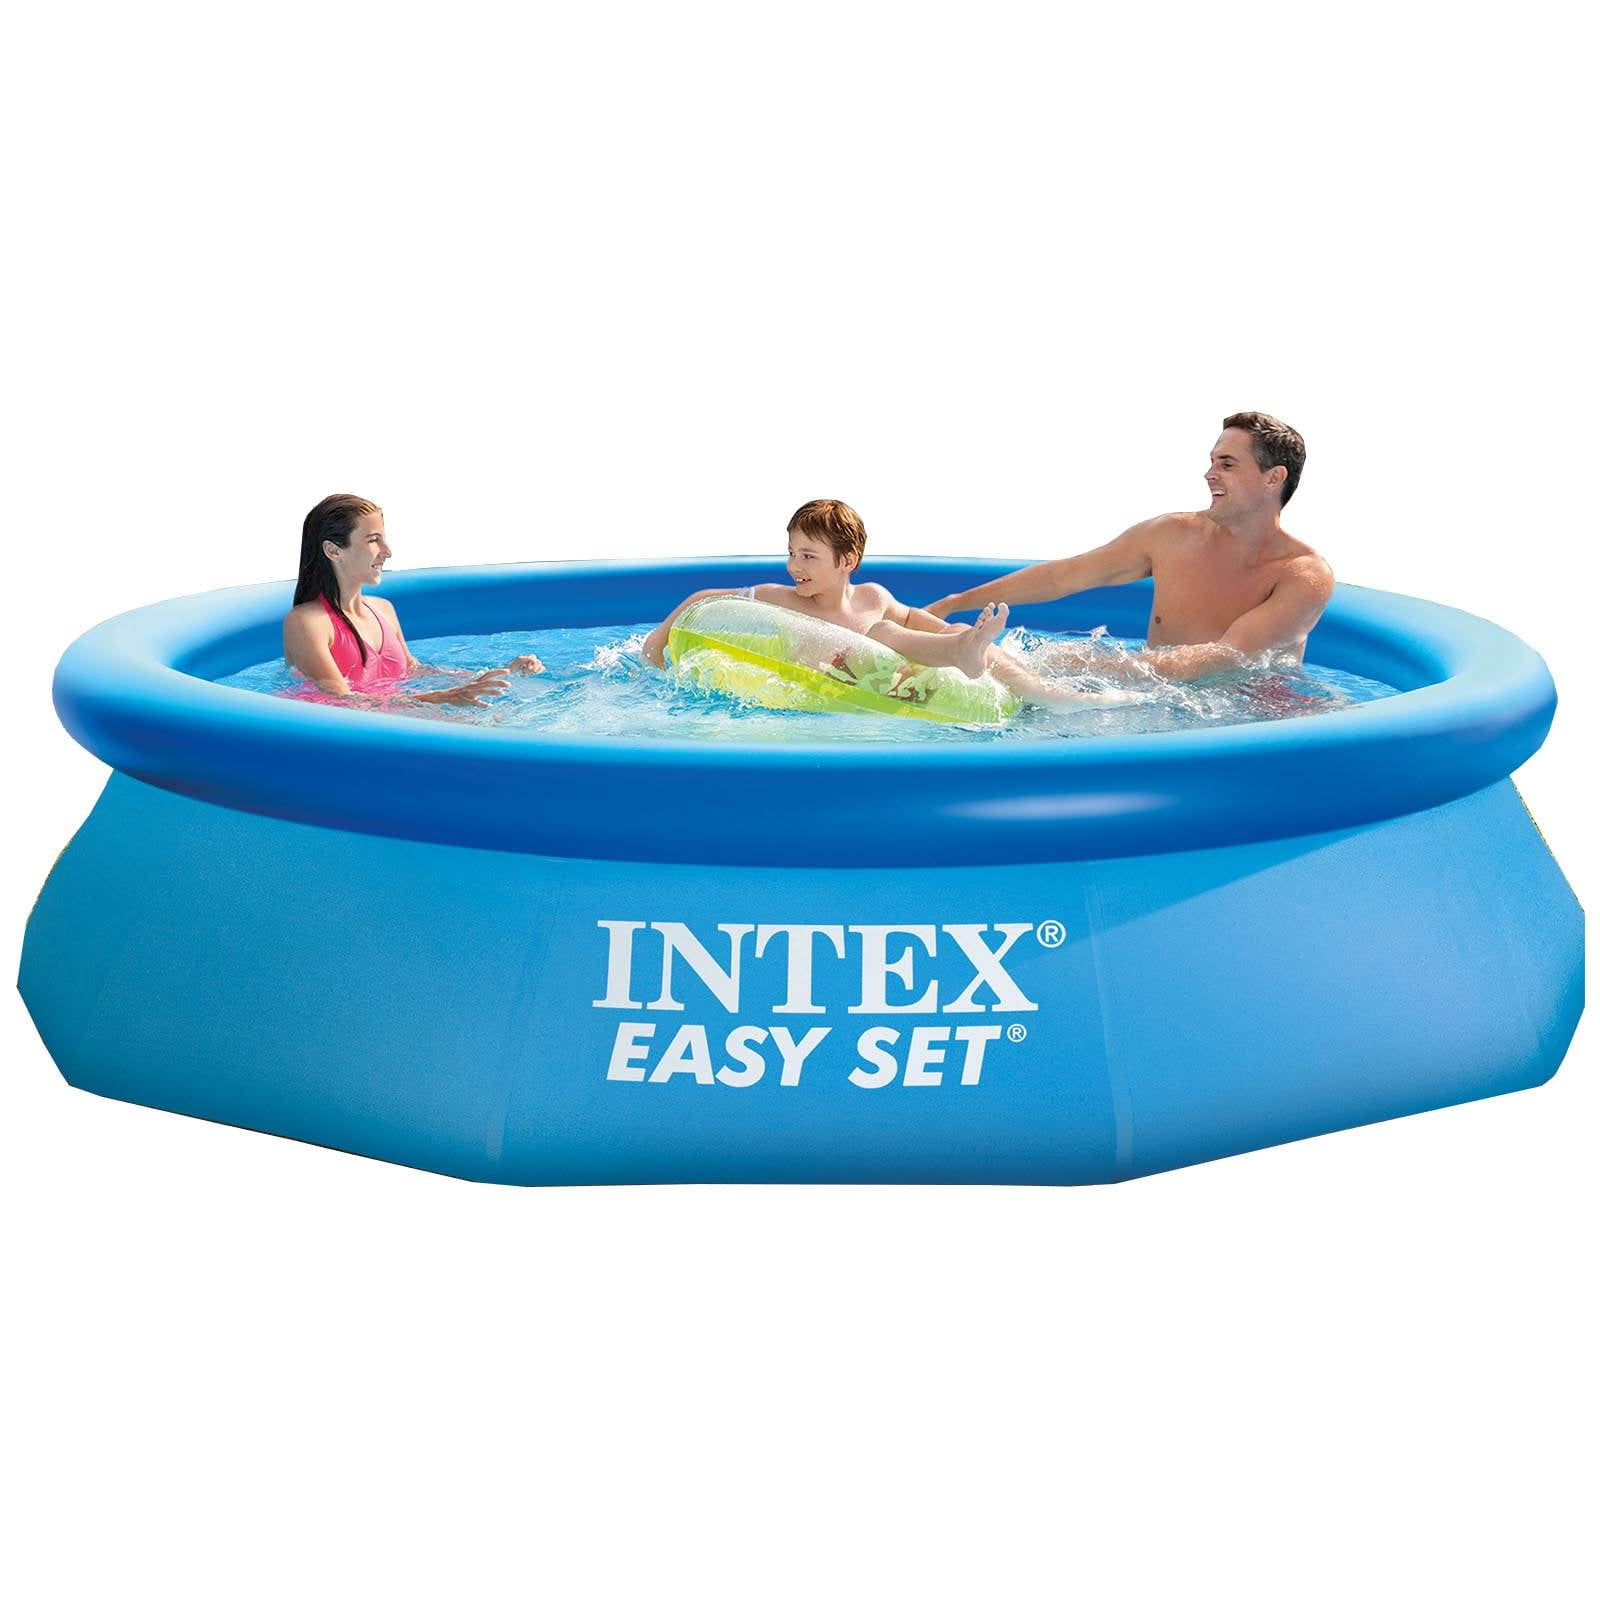 forhandler Dare kradse Intex Easy Set 10 Ft x 30 In Above Ground Inflatable Round Swimming Pool -  Walmart.com